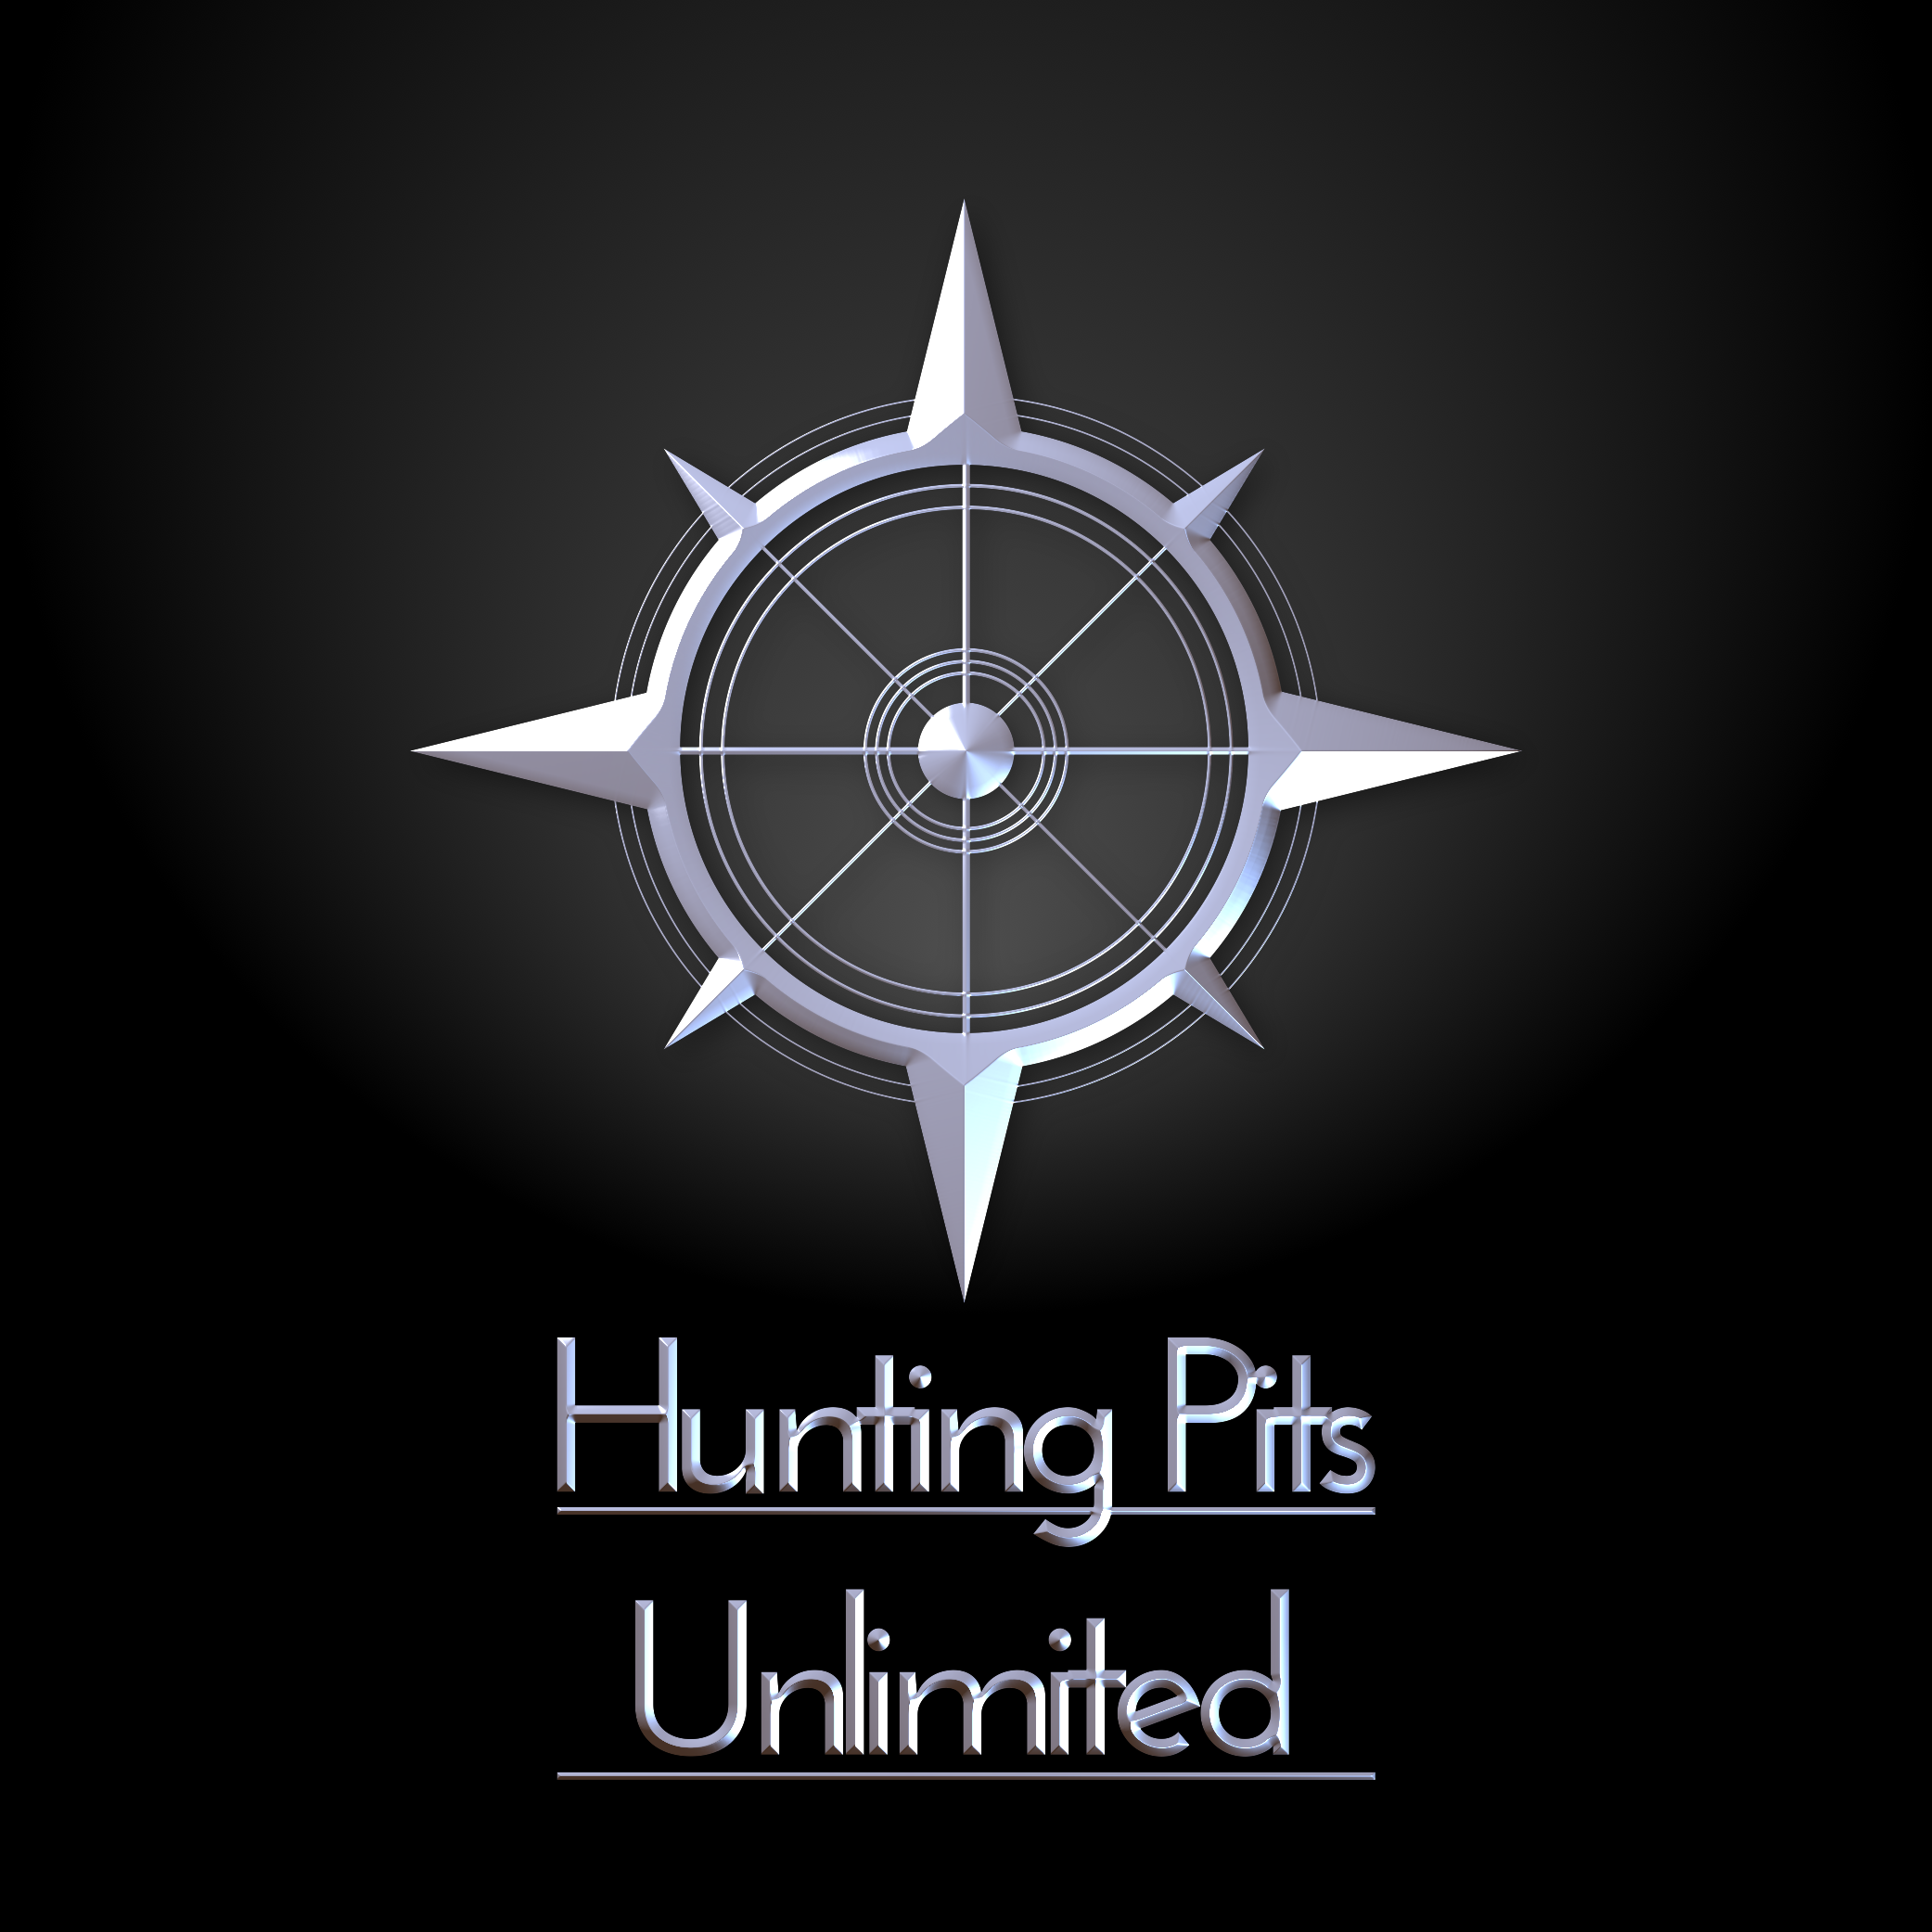 Hunting Pits Unlimited